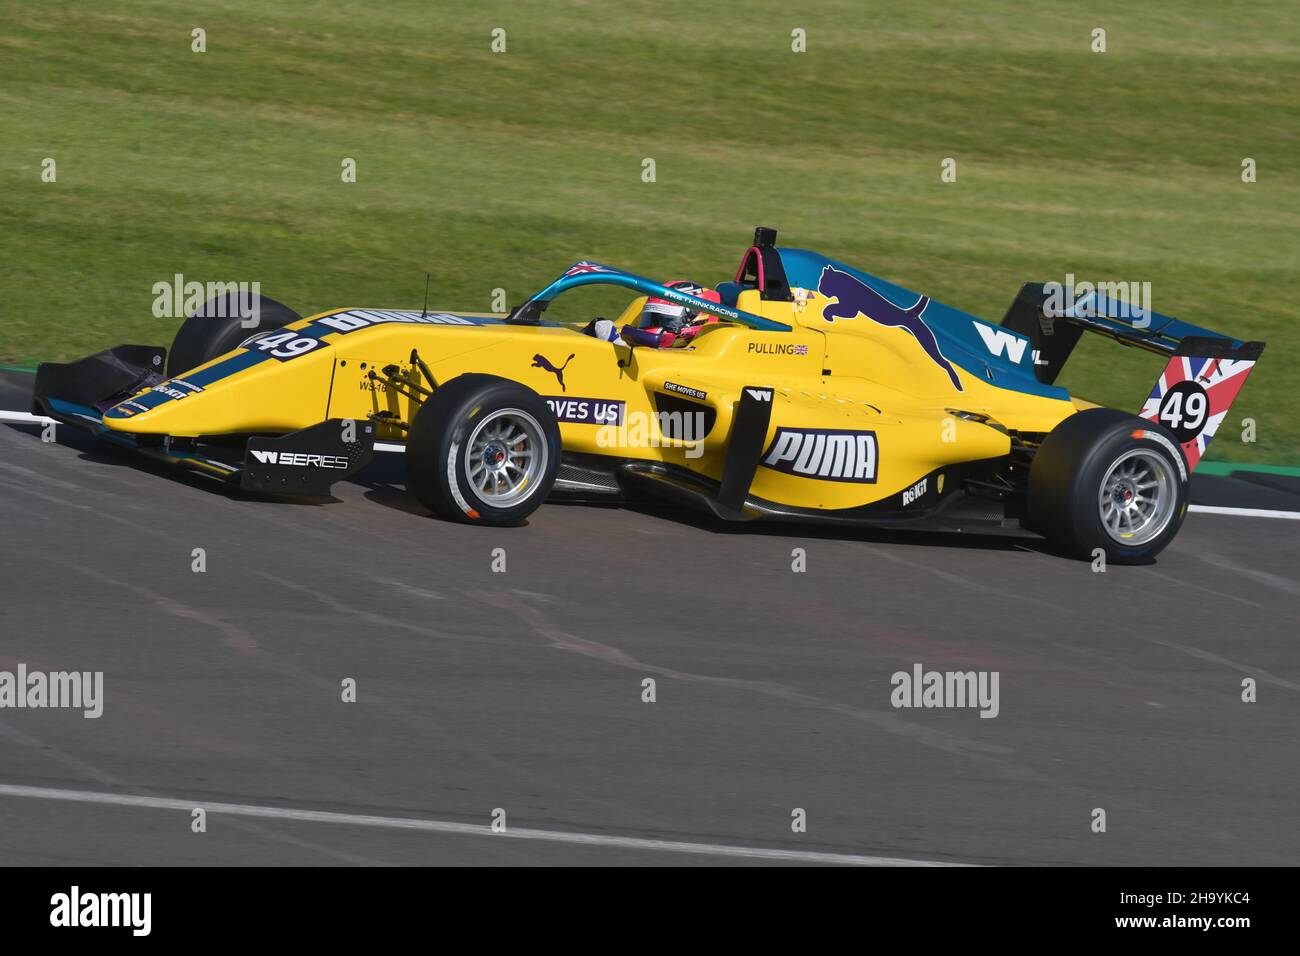 Abbi Pulling in the W Series British Grand Prix support race at Silverstone. Stock Photo